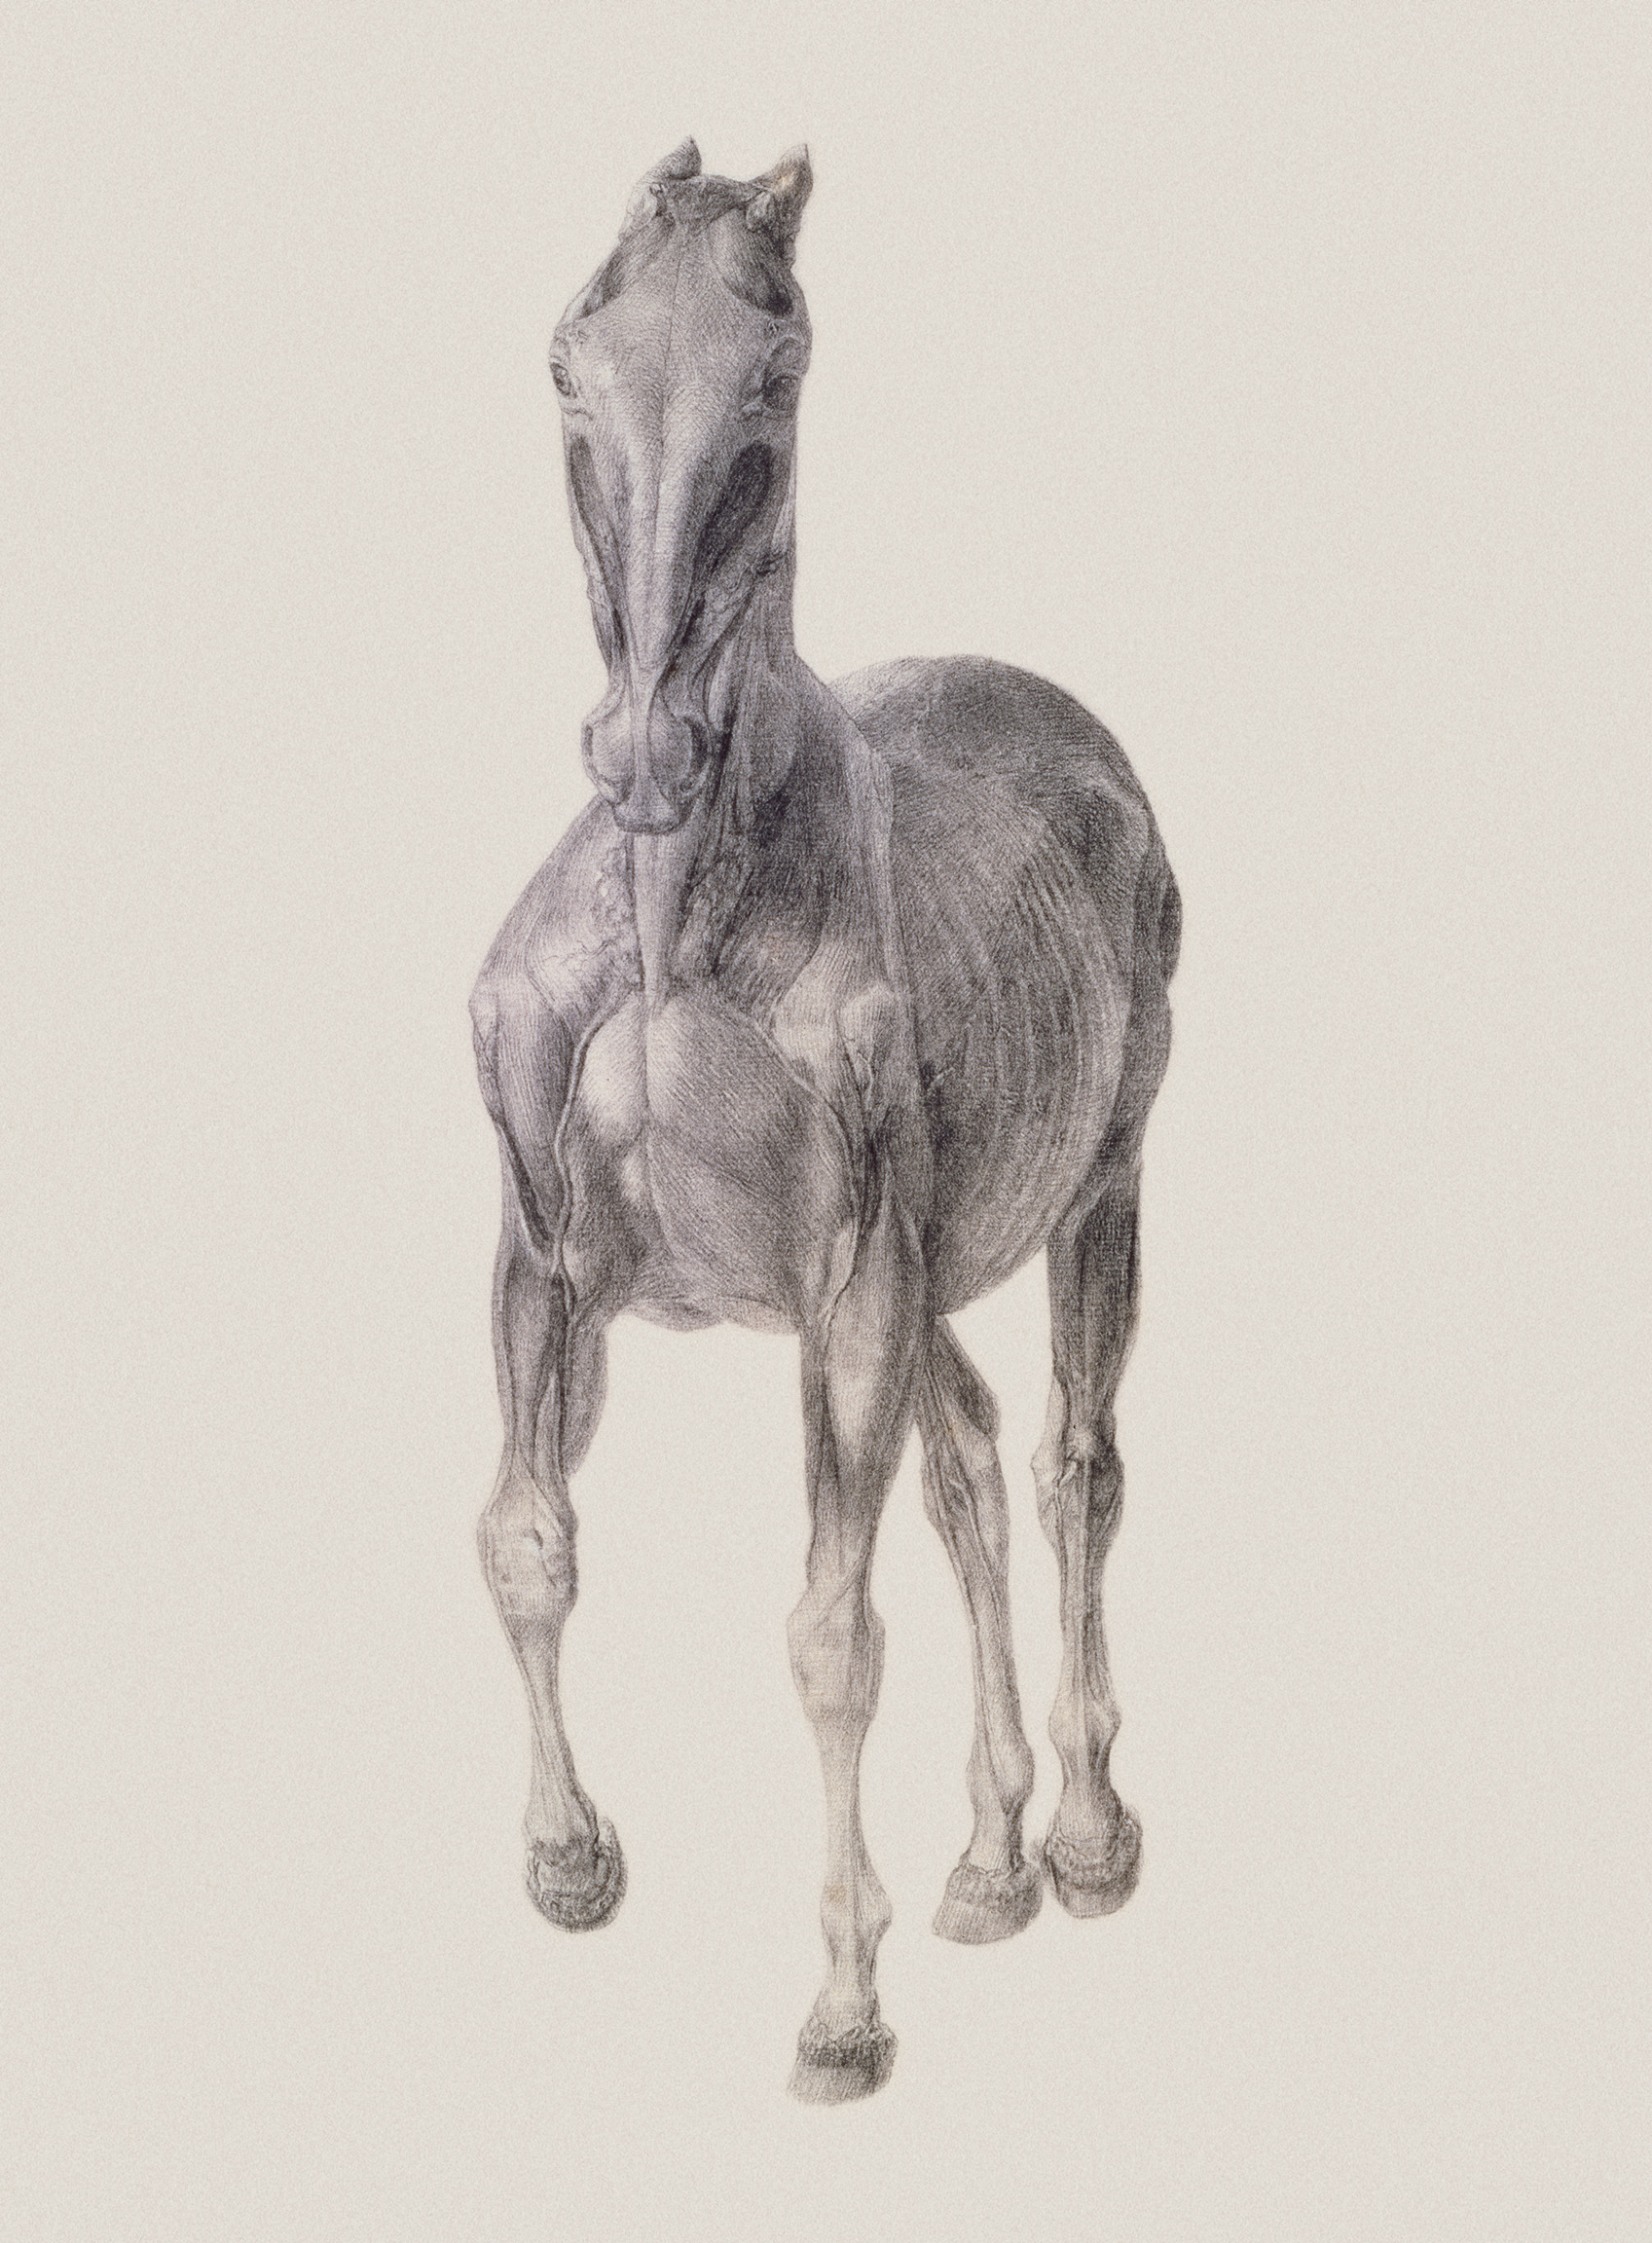 Seventh Anatomical Table of Horse Muscles